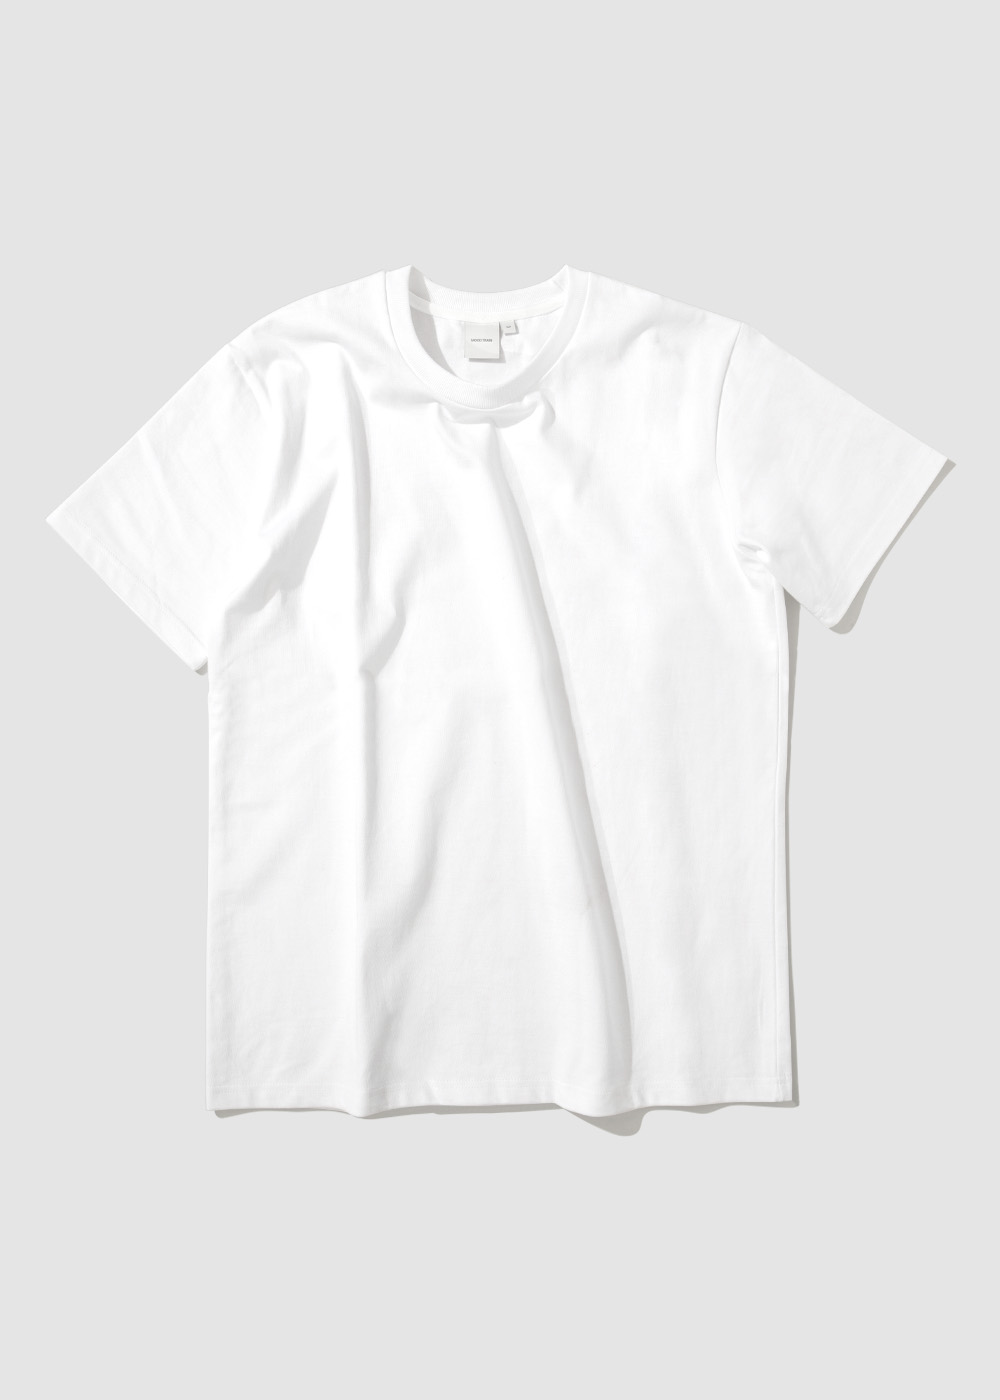 B. Silked Combed Cotton 100% 30/2 Single T-shirt _ white